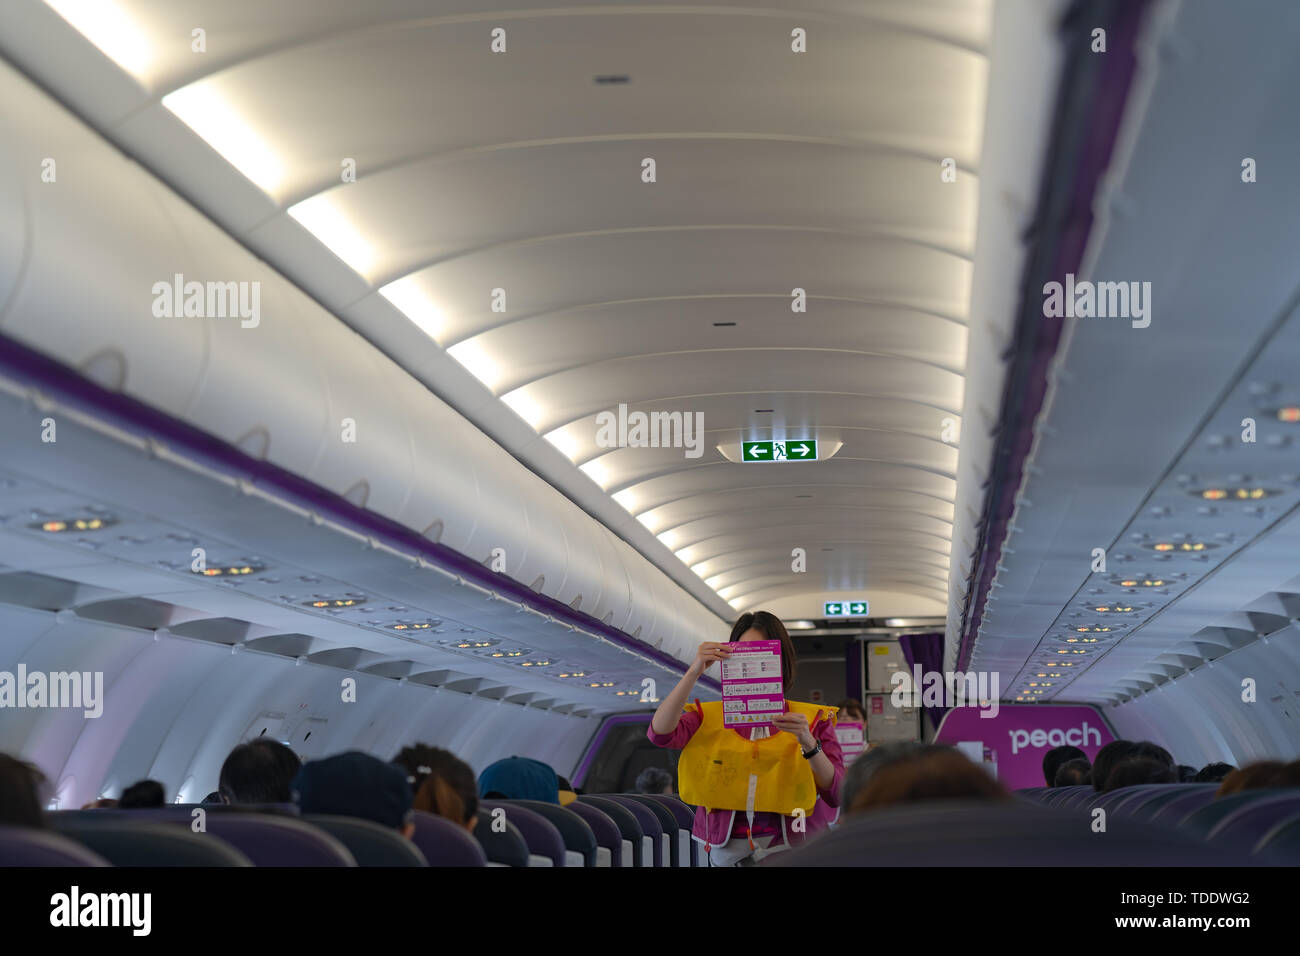 Airbus A320-200 aircraft cabin by Peach Aviation, a budget carrier based in Japan. Stock Photo